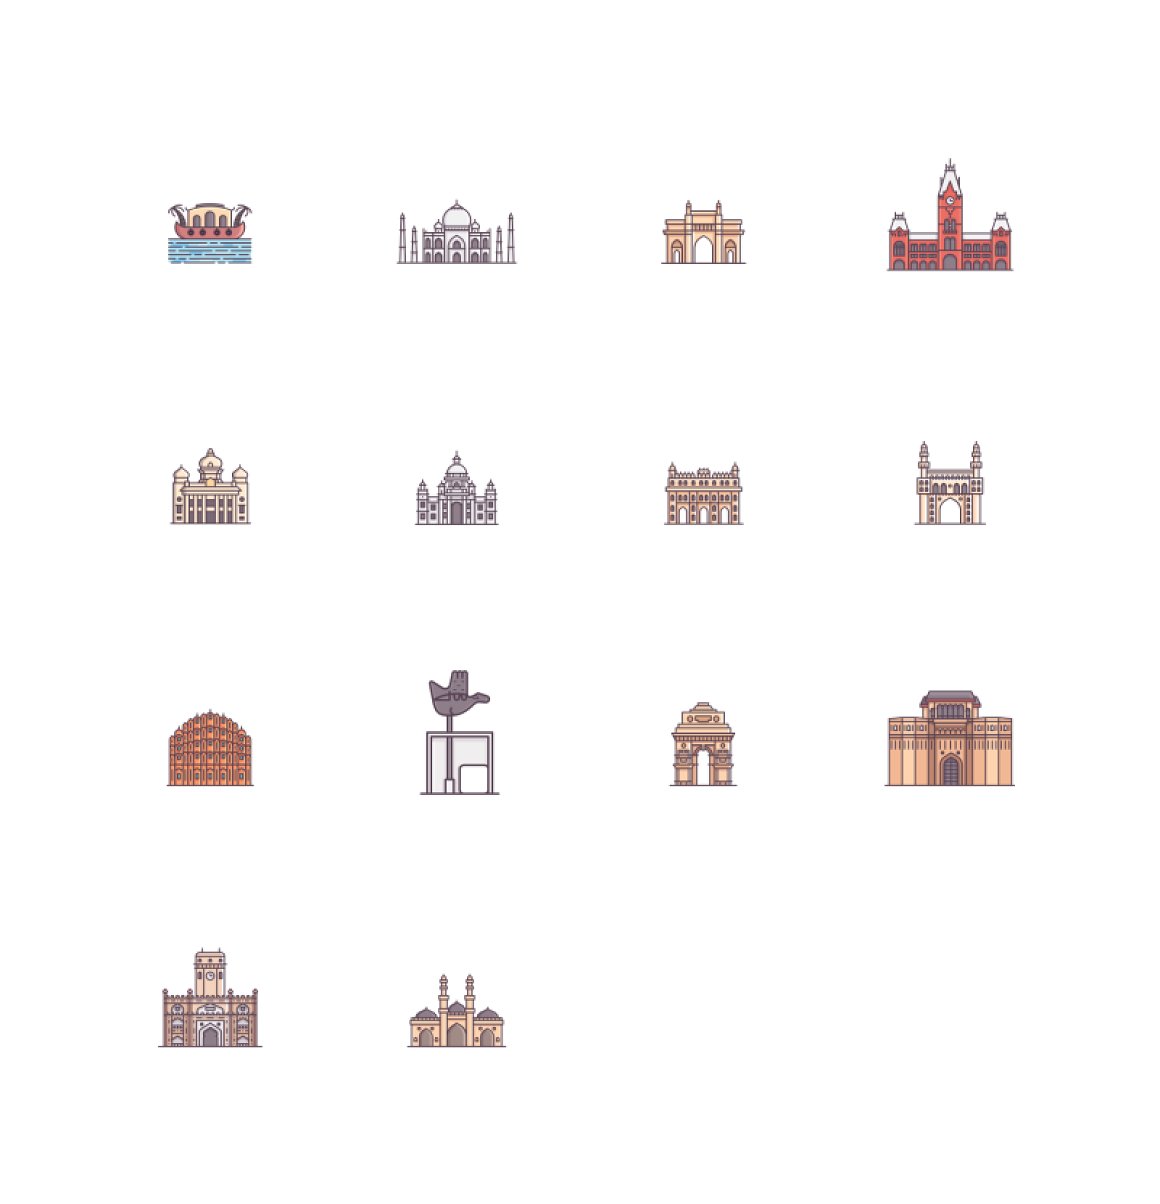 14 different icons of heritage sites and Indian cities on a white background.